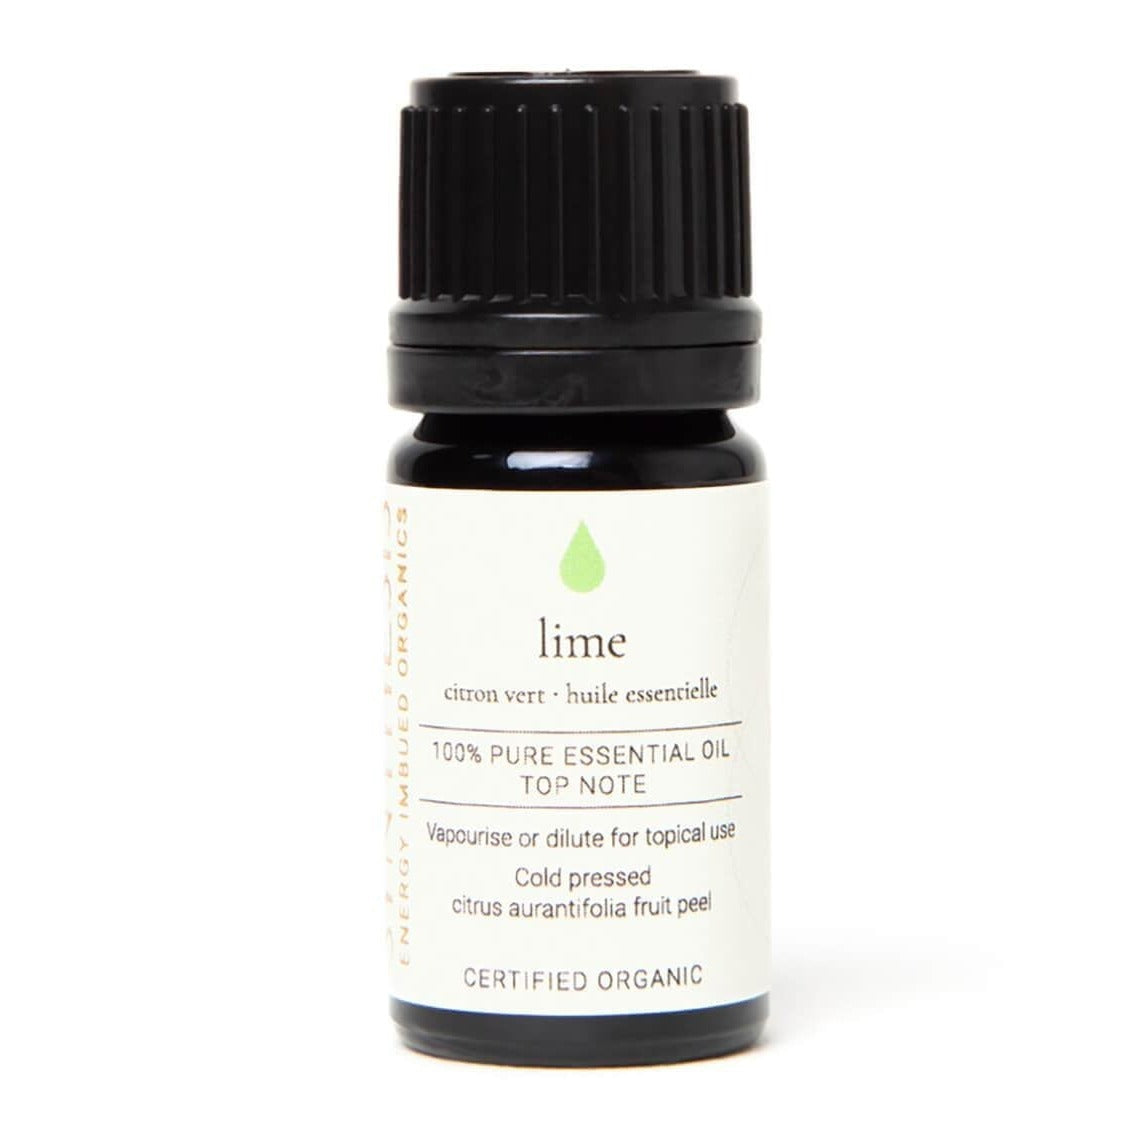 Lime Certified Organic Essential Oil aroma Synthesis Organics